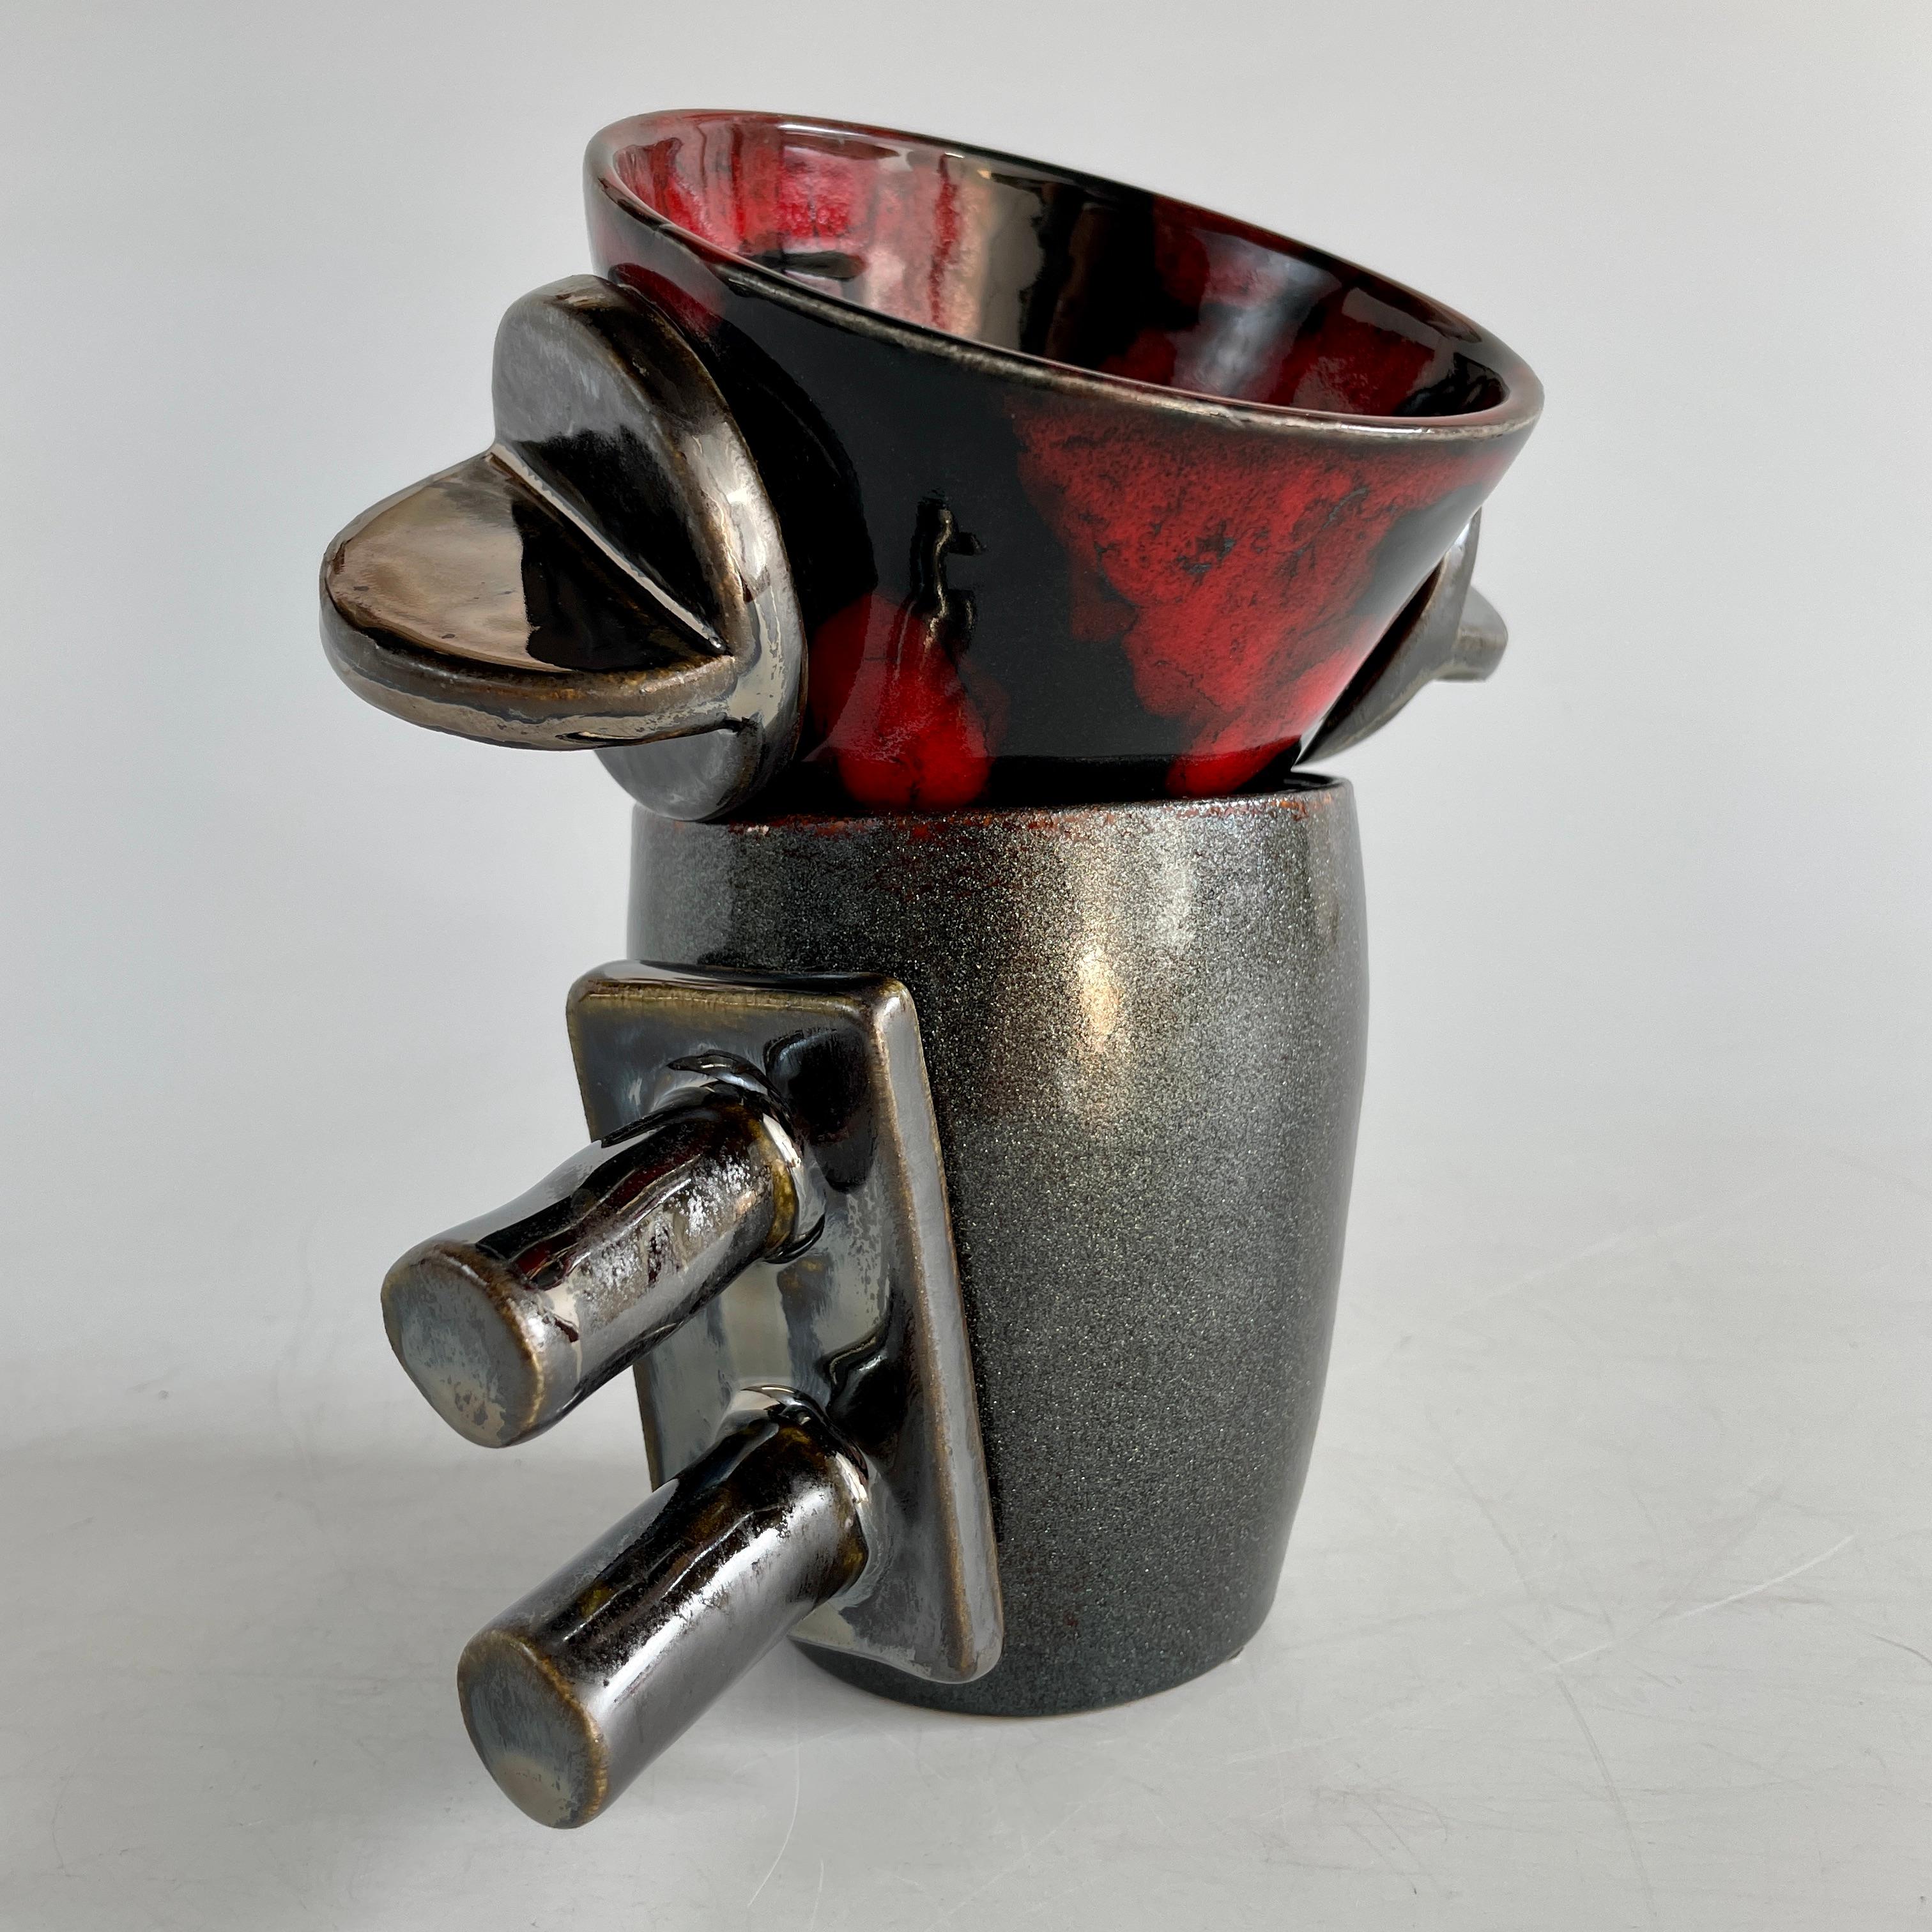 North American Rebar Tumbler, Handmade and Food Safe, by Artist Stef Duffy For Sale